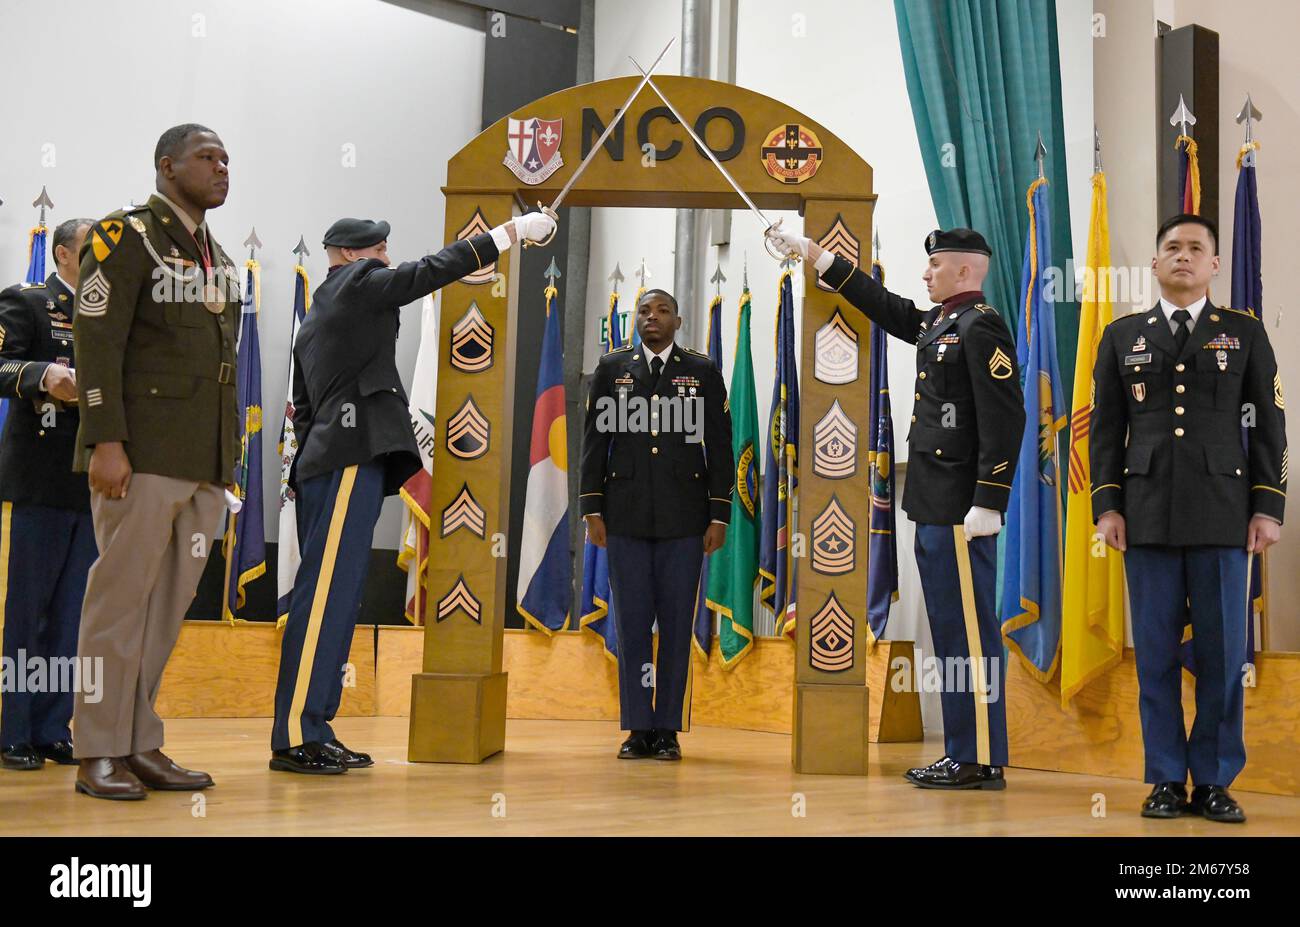 U.S. Army Sgt. Joshua Bell, Headquarters and Headquarters Company, 30th Medical Brigade crosses the archway during a Noncommissioned Officer Induction Ceremony, April 14, 2022 at Sembach, Germany. Twenty-five newly promoted Soldiers were inducted as members of the NCO corps. Stock Photo